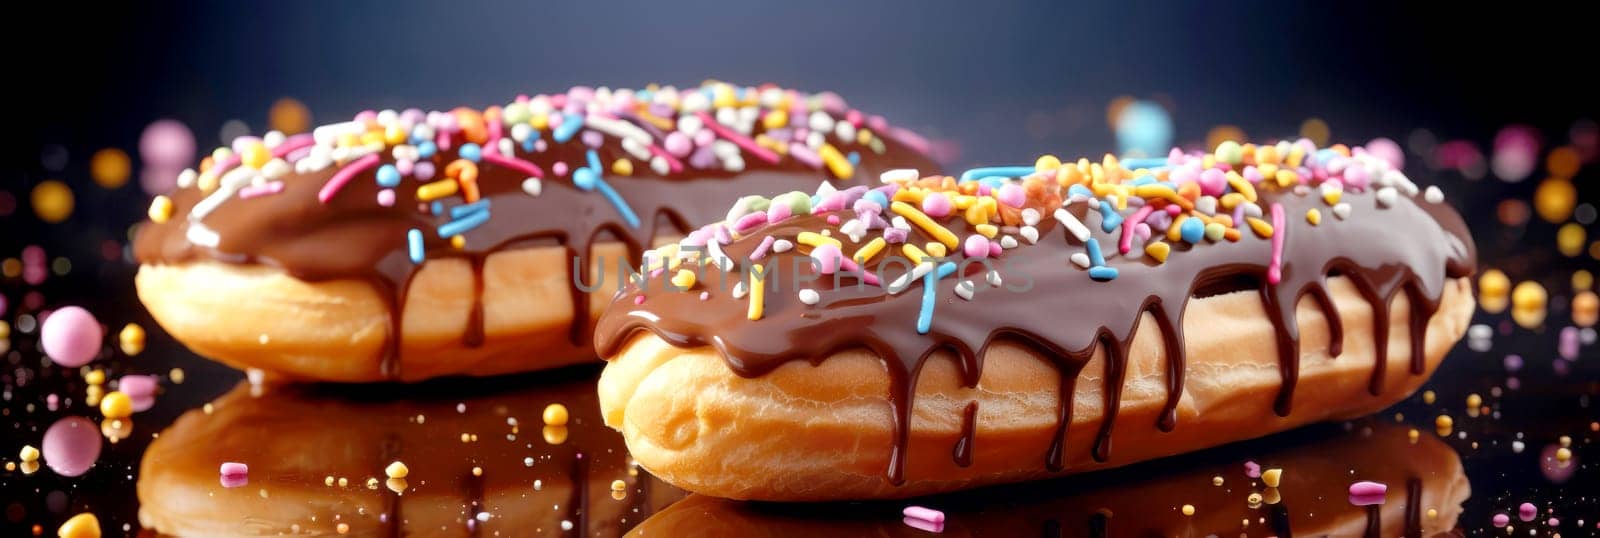 Two delicious chocolate glazed donuts with colorful sprinkles